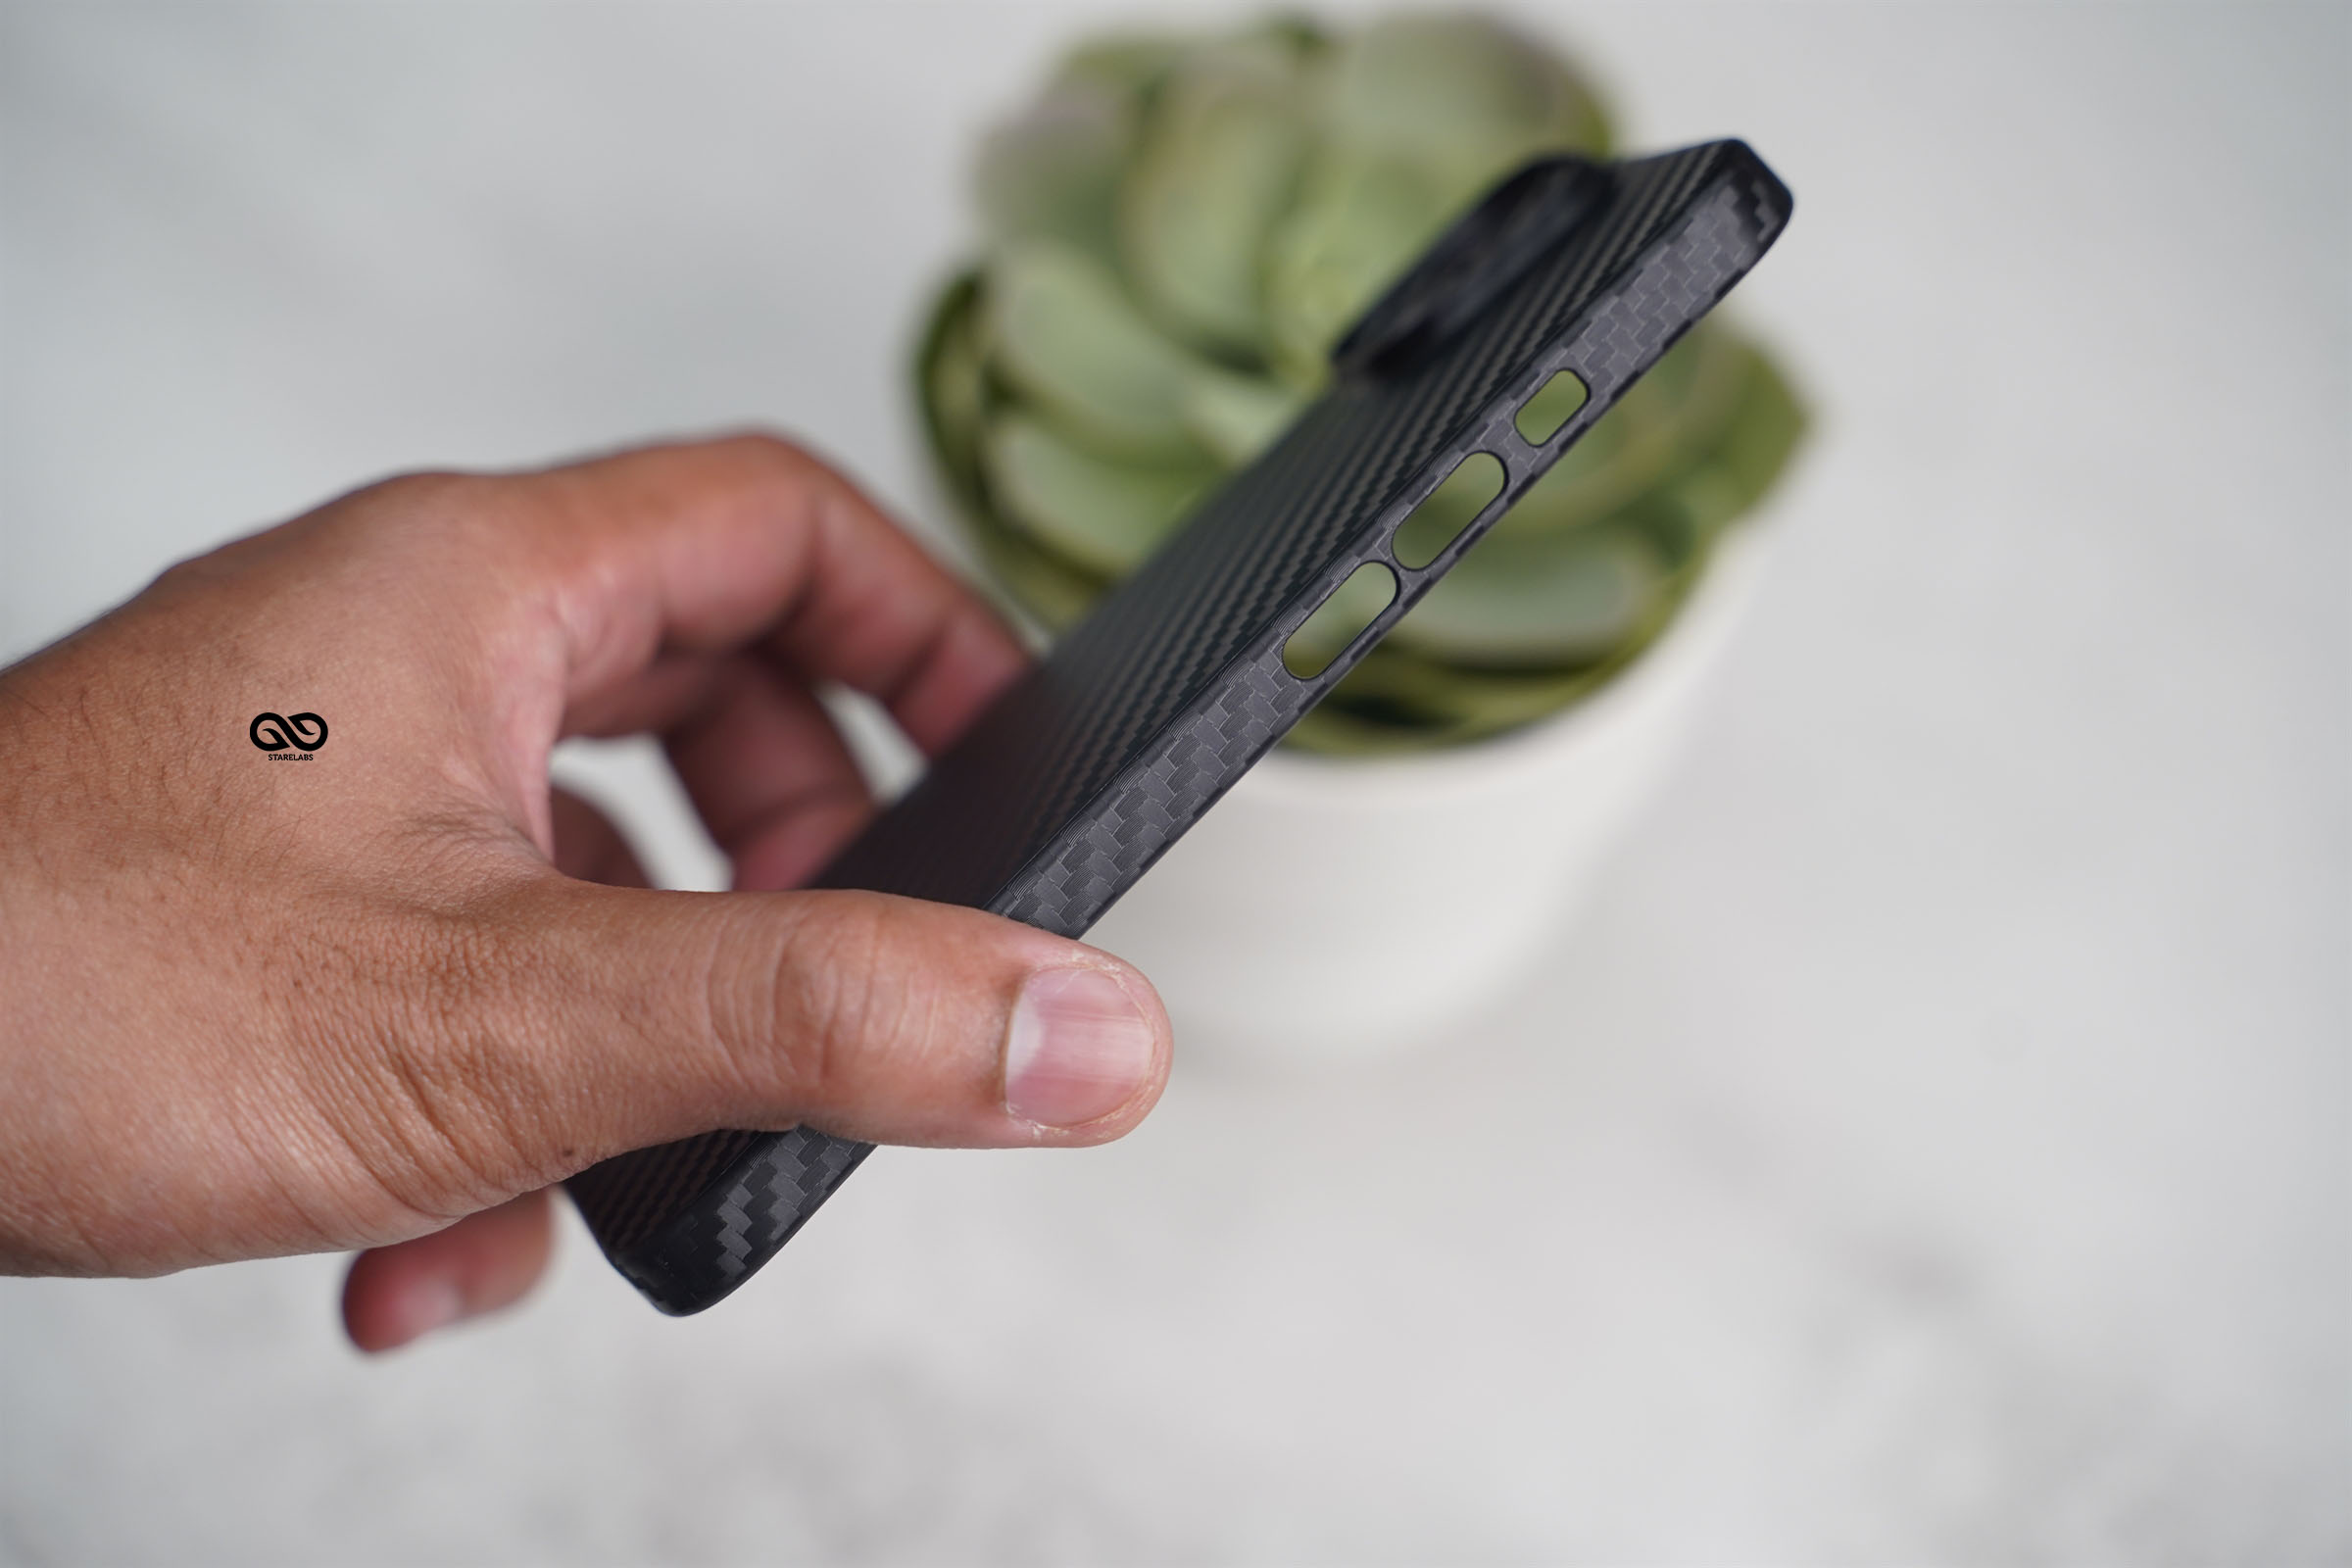 Carbon Ultra Thin Case for iPhone 15 Plus